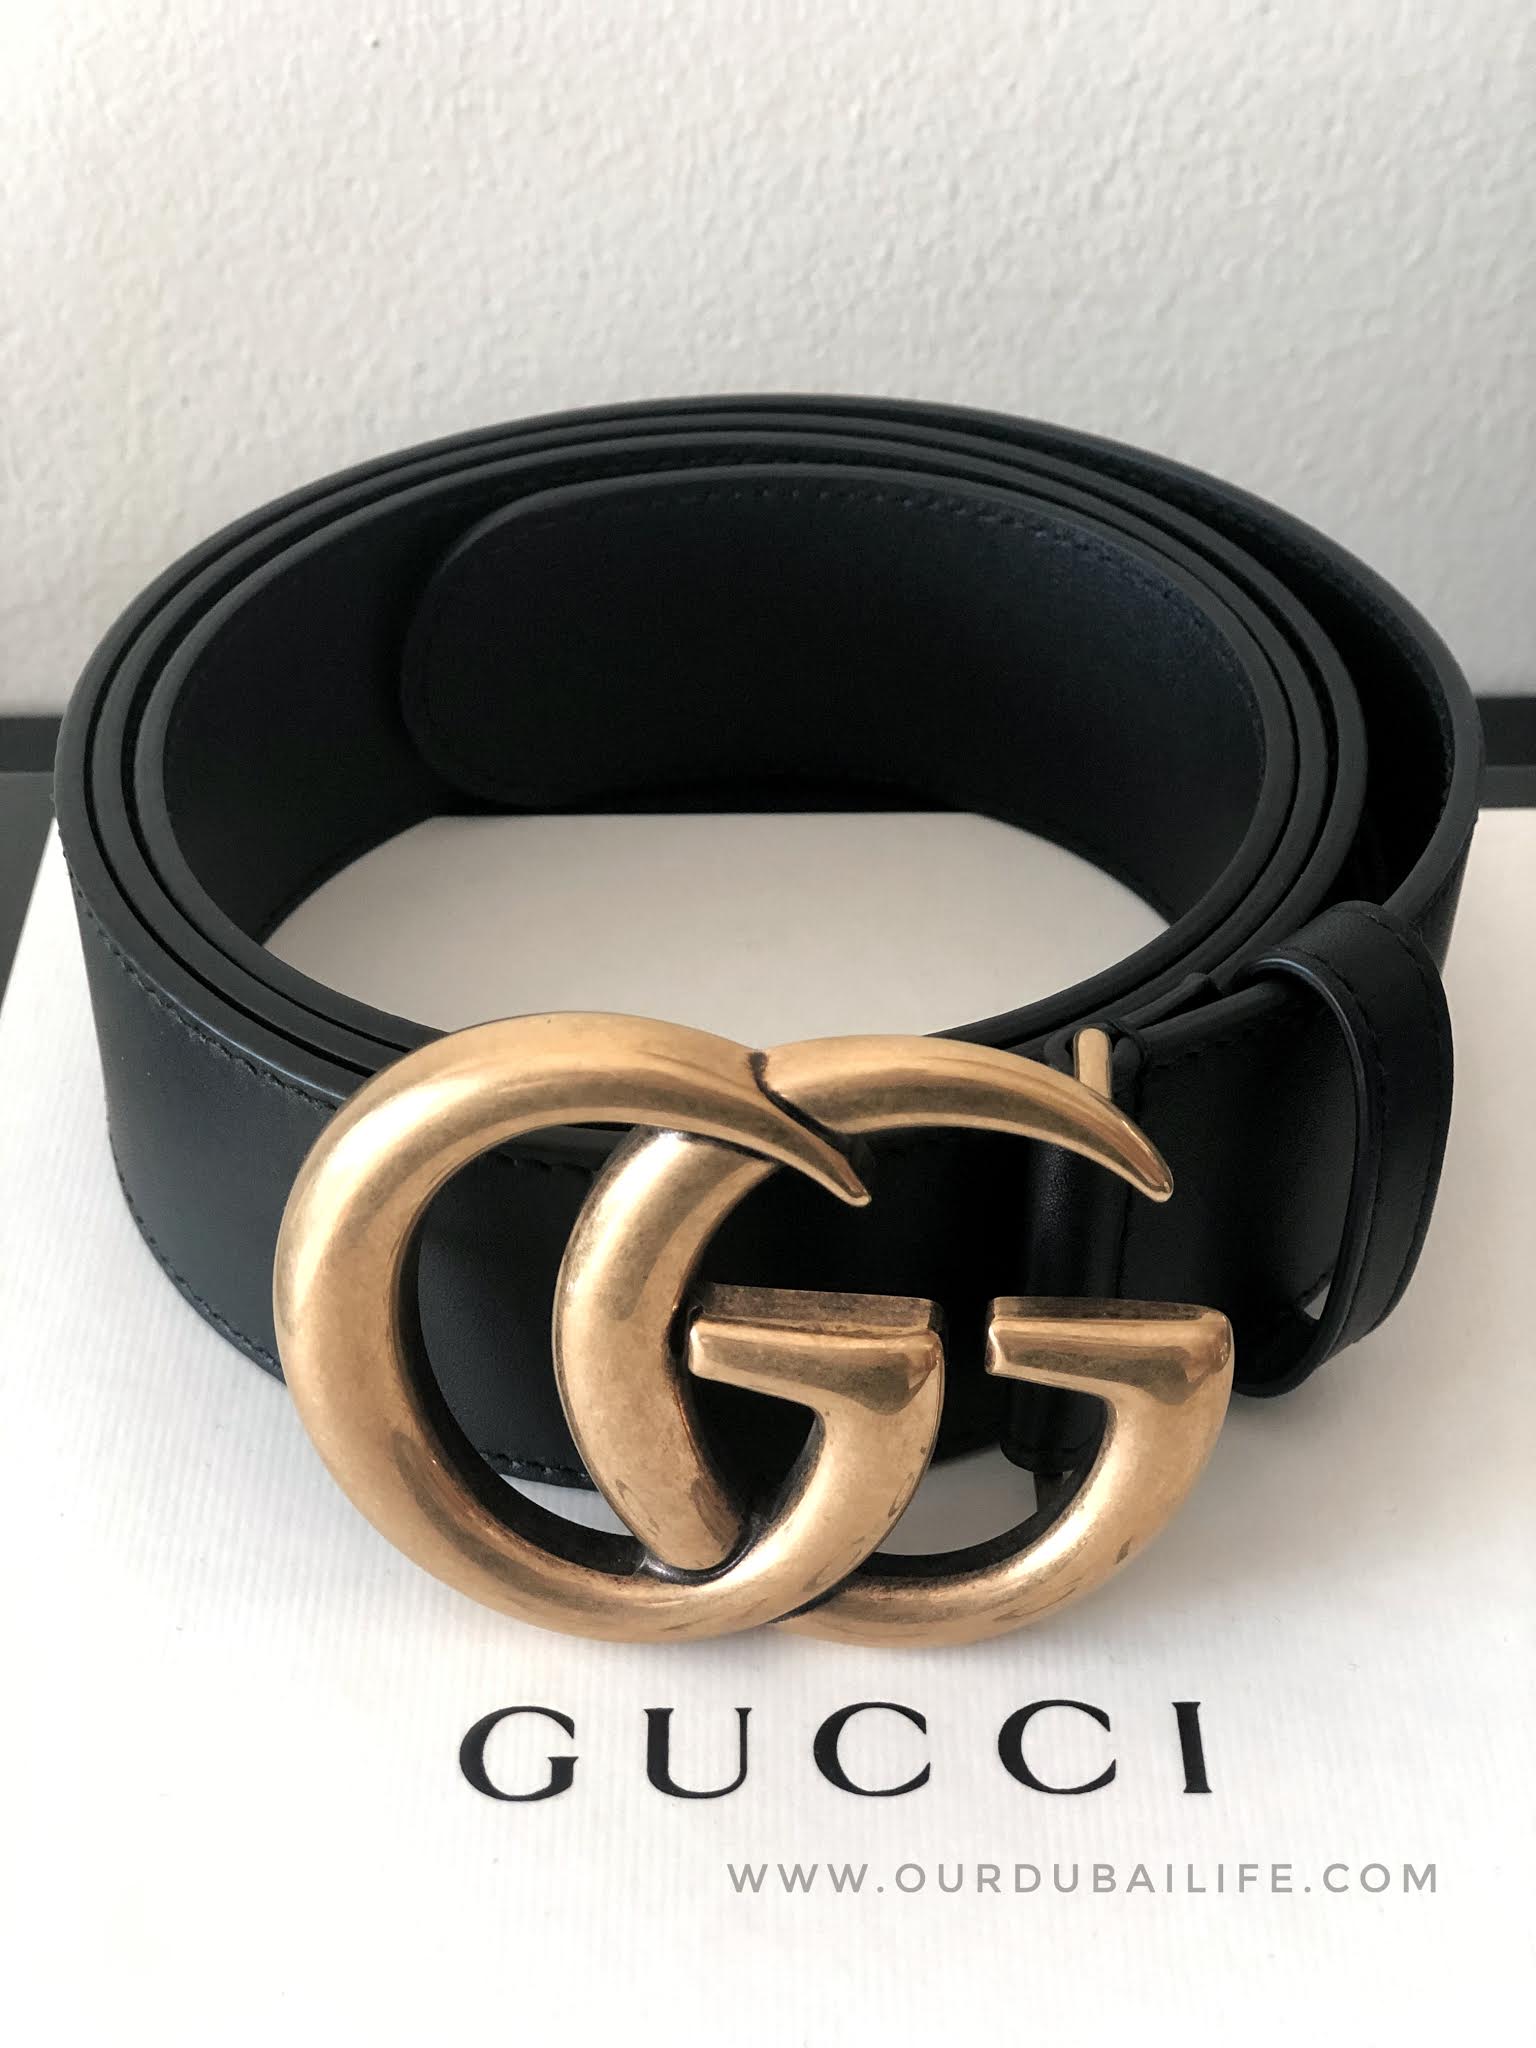 GUCCI black belt with gold large buckle